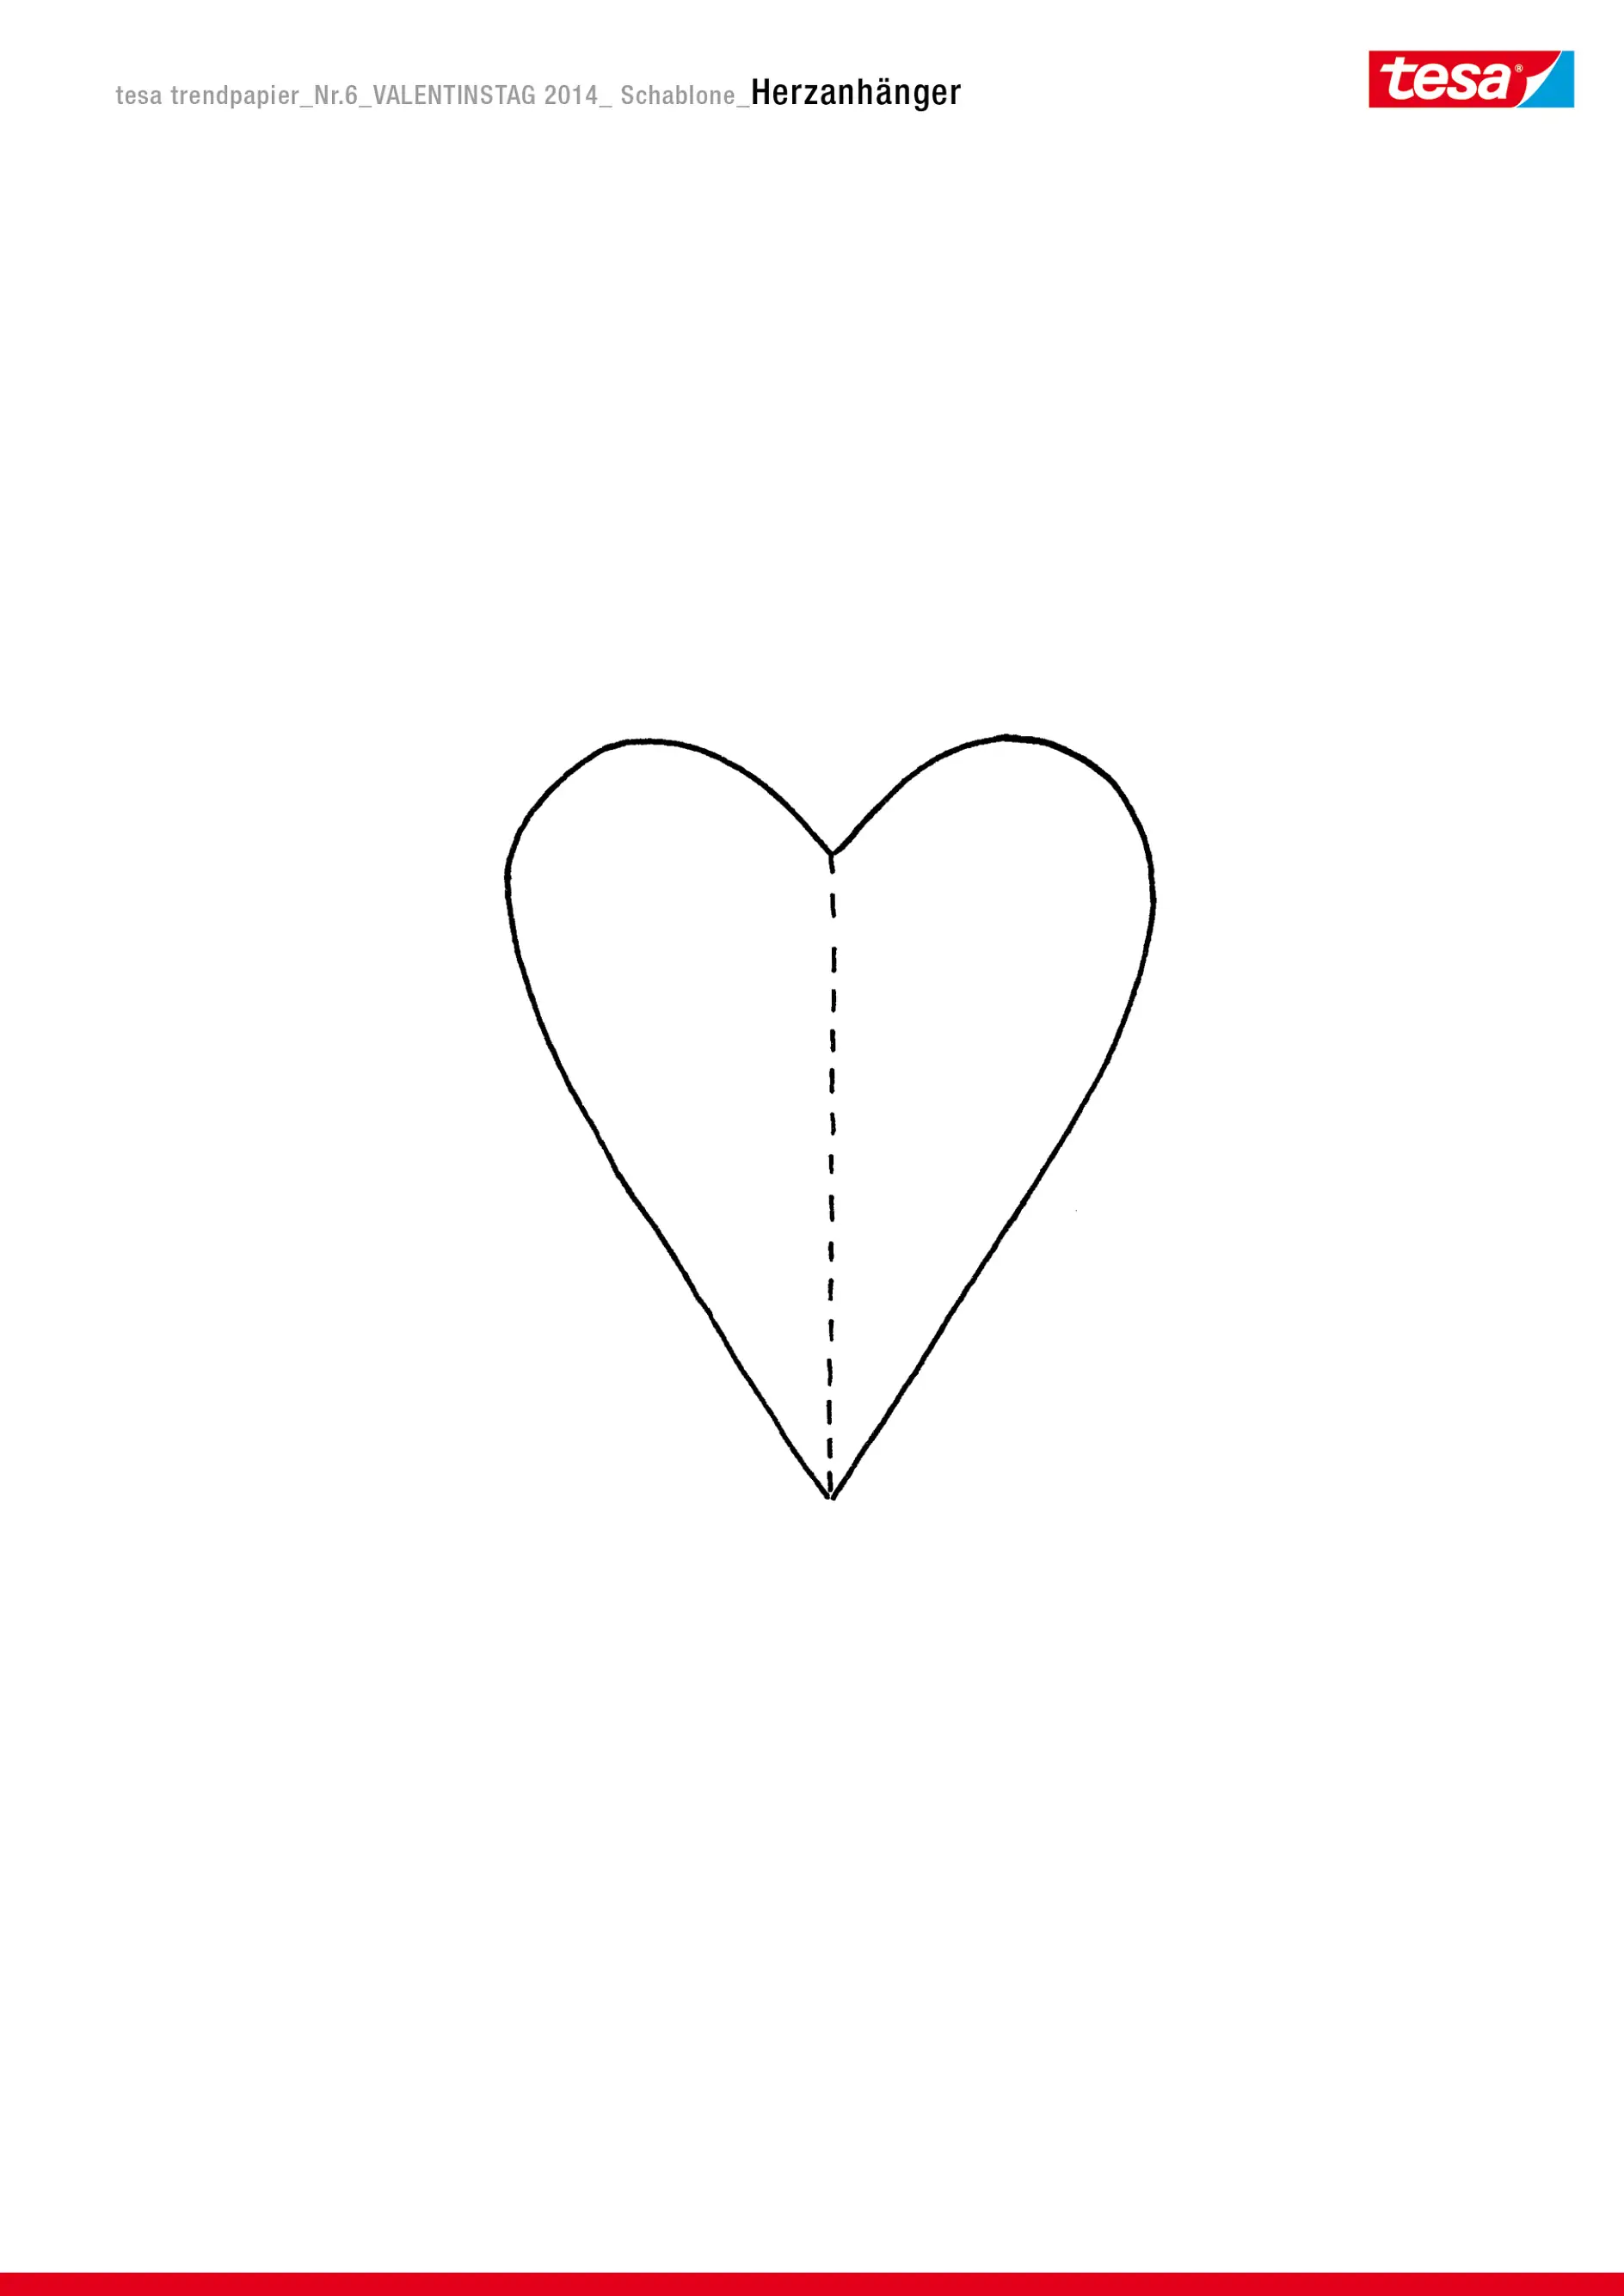 Download here the template for your heart.